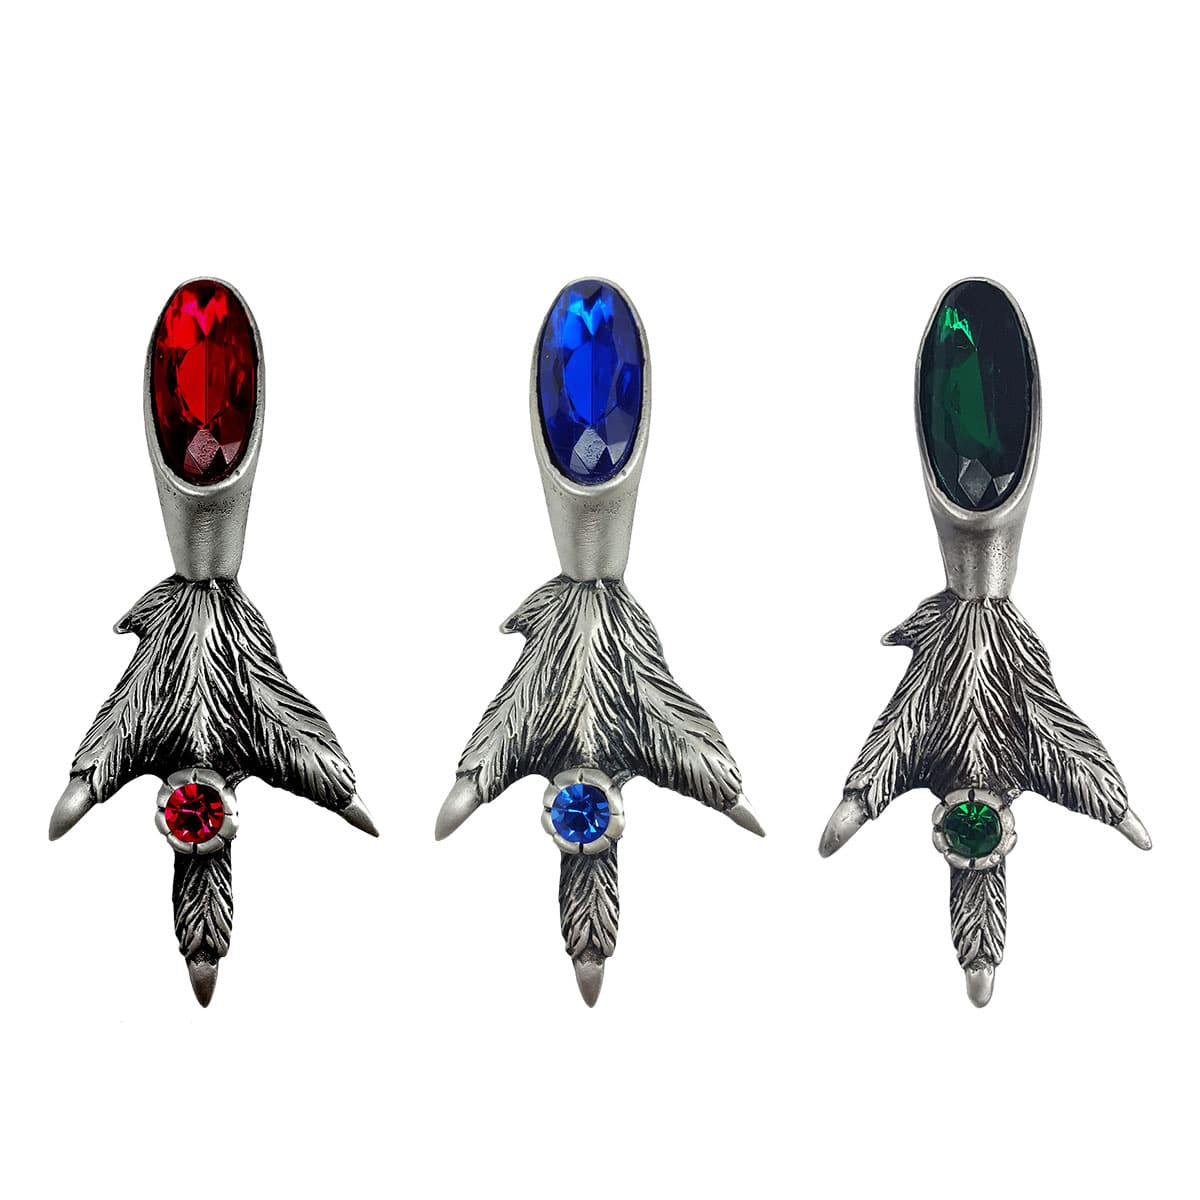 A pair of Fancy Grouse Claw Kilt Pin adorned with colorful red, blue, and green stones.